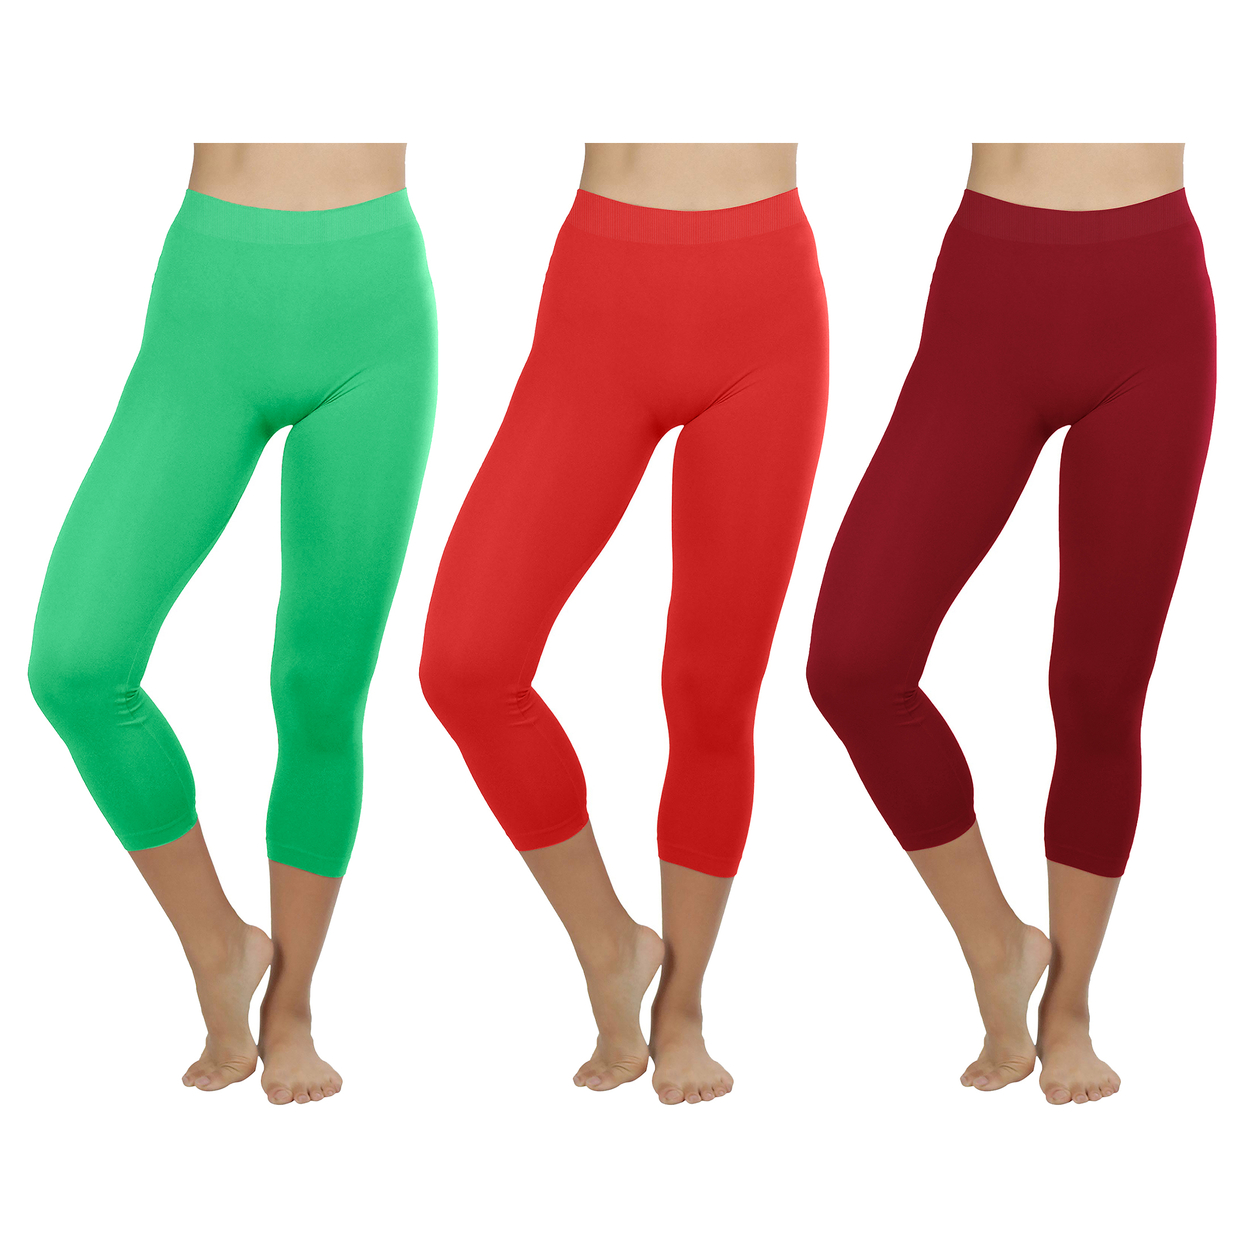 2-Pack: Women's Ultra-Soft High Waisted Smooth Stretch Active Yoga Capri Leggings - Green &red, X-large